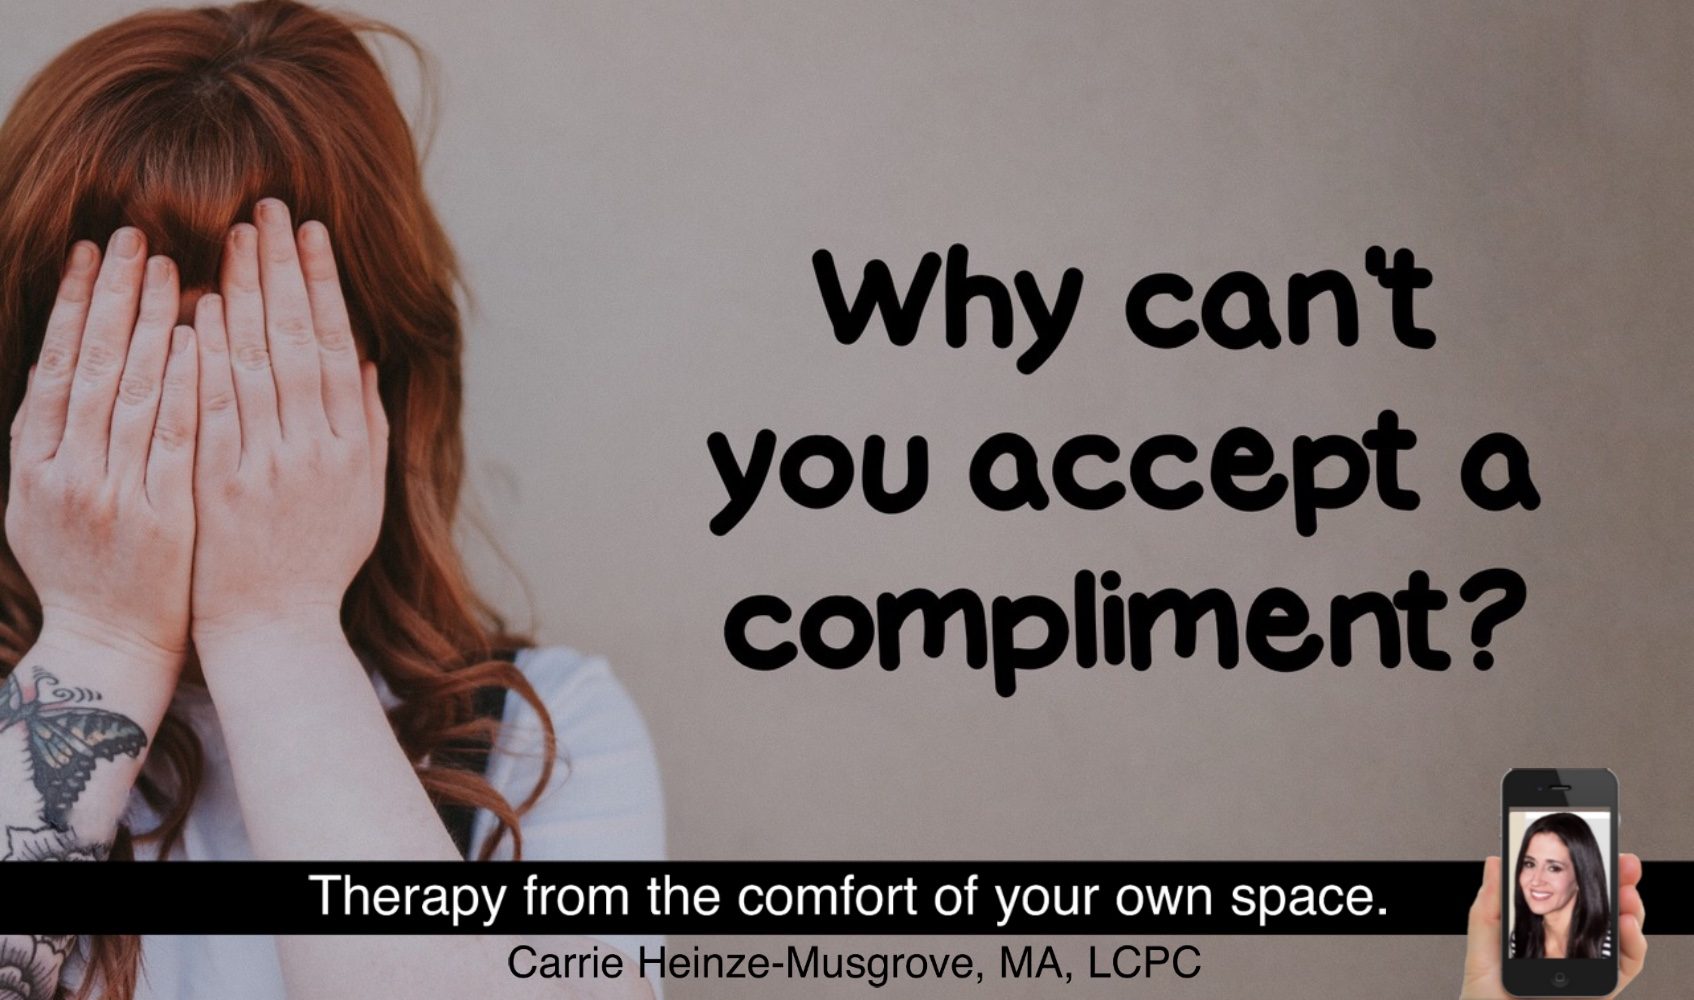 Why Can’t You Accept a Compliment?